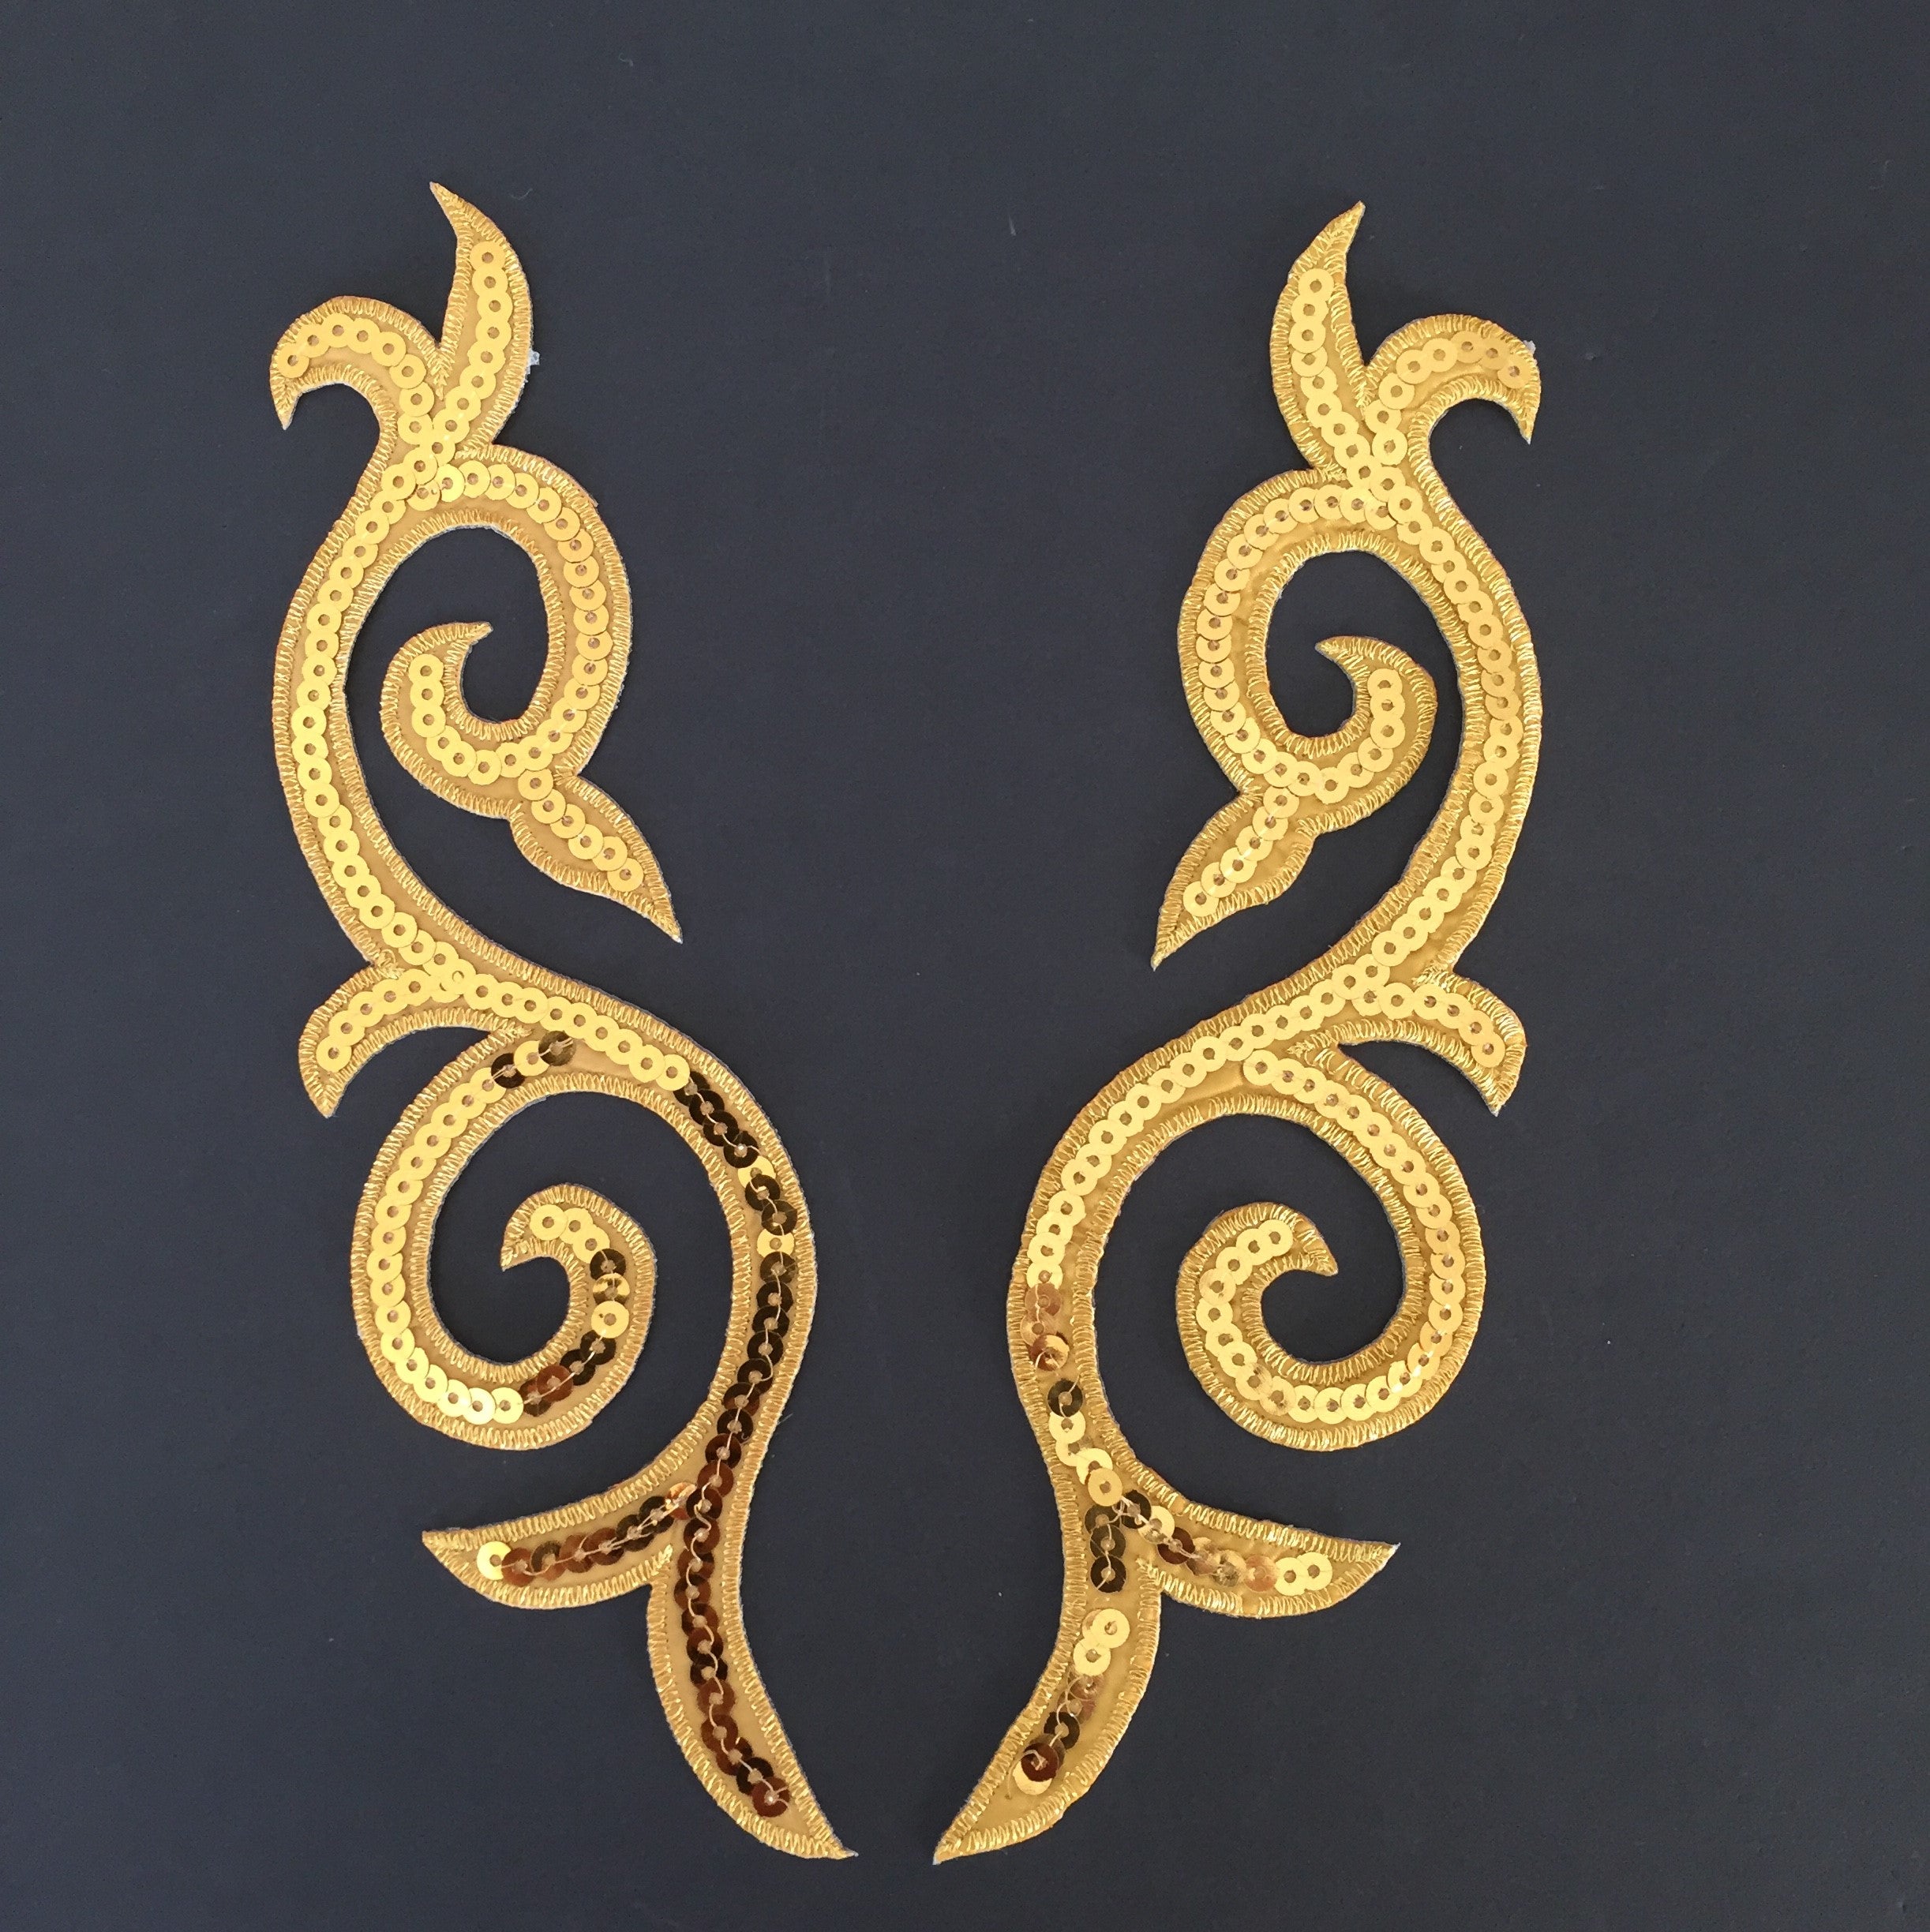 Sequinned Baroque Style Gold Scroll Pair. Popular for Cosplay and Costumes